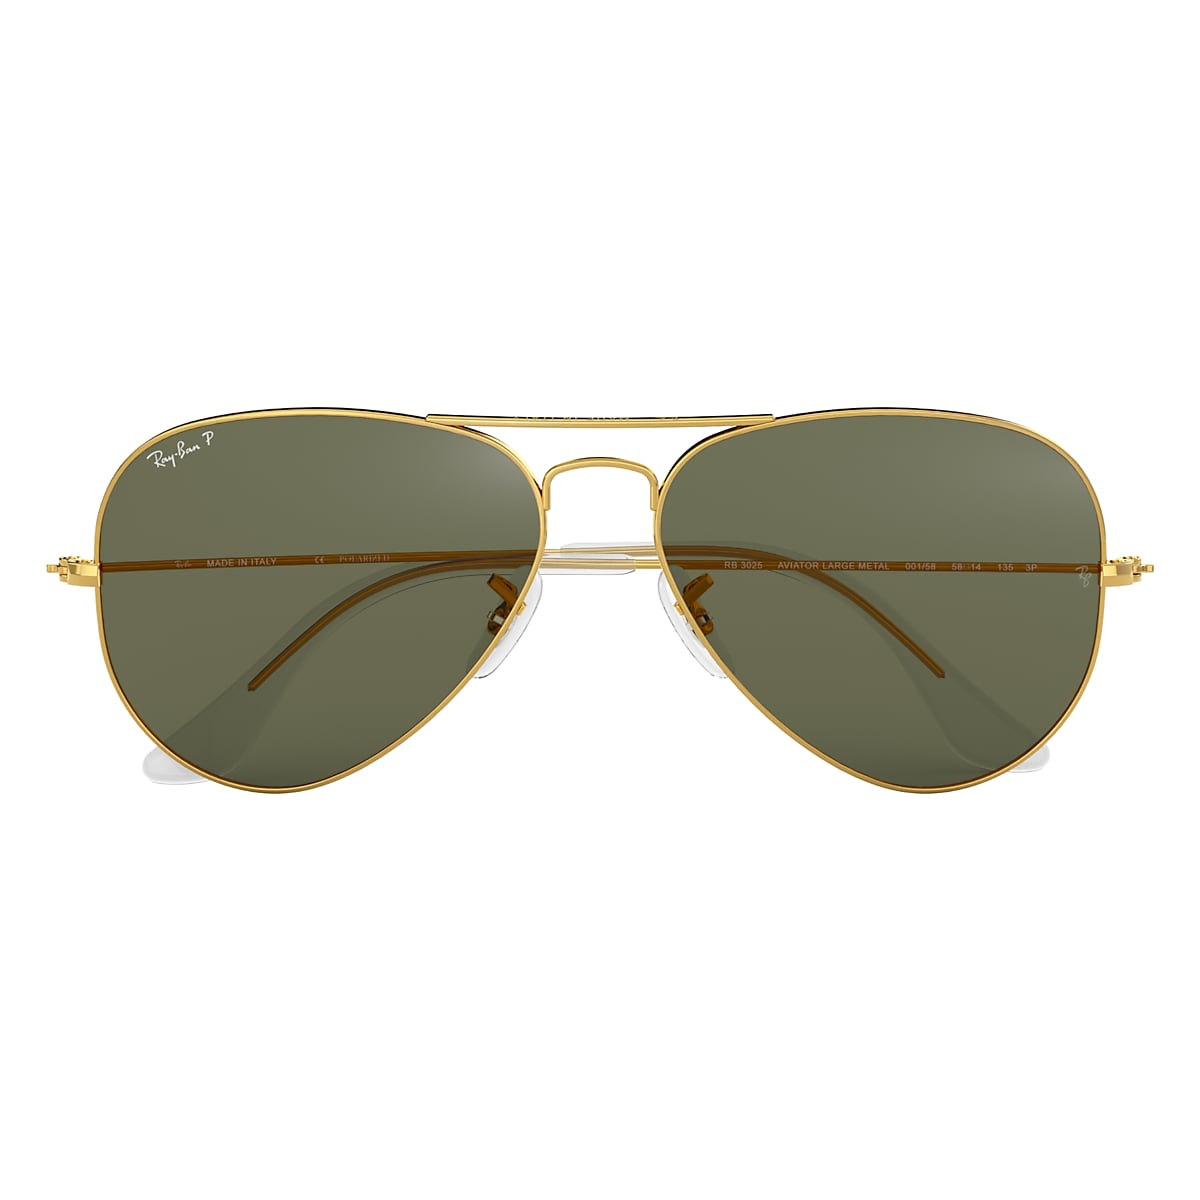 advies reptielen omringen Aviator Classic Sunglasses in Gold and Green - RB3025 | Ray-Ban® US